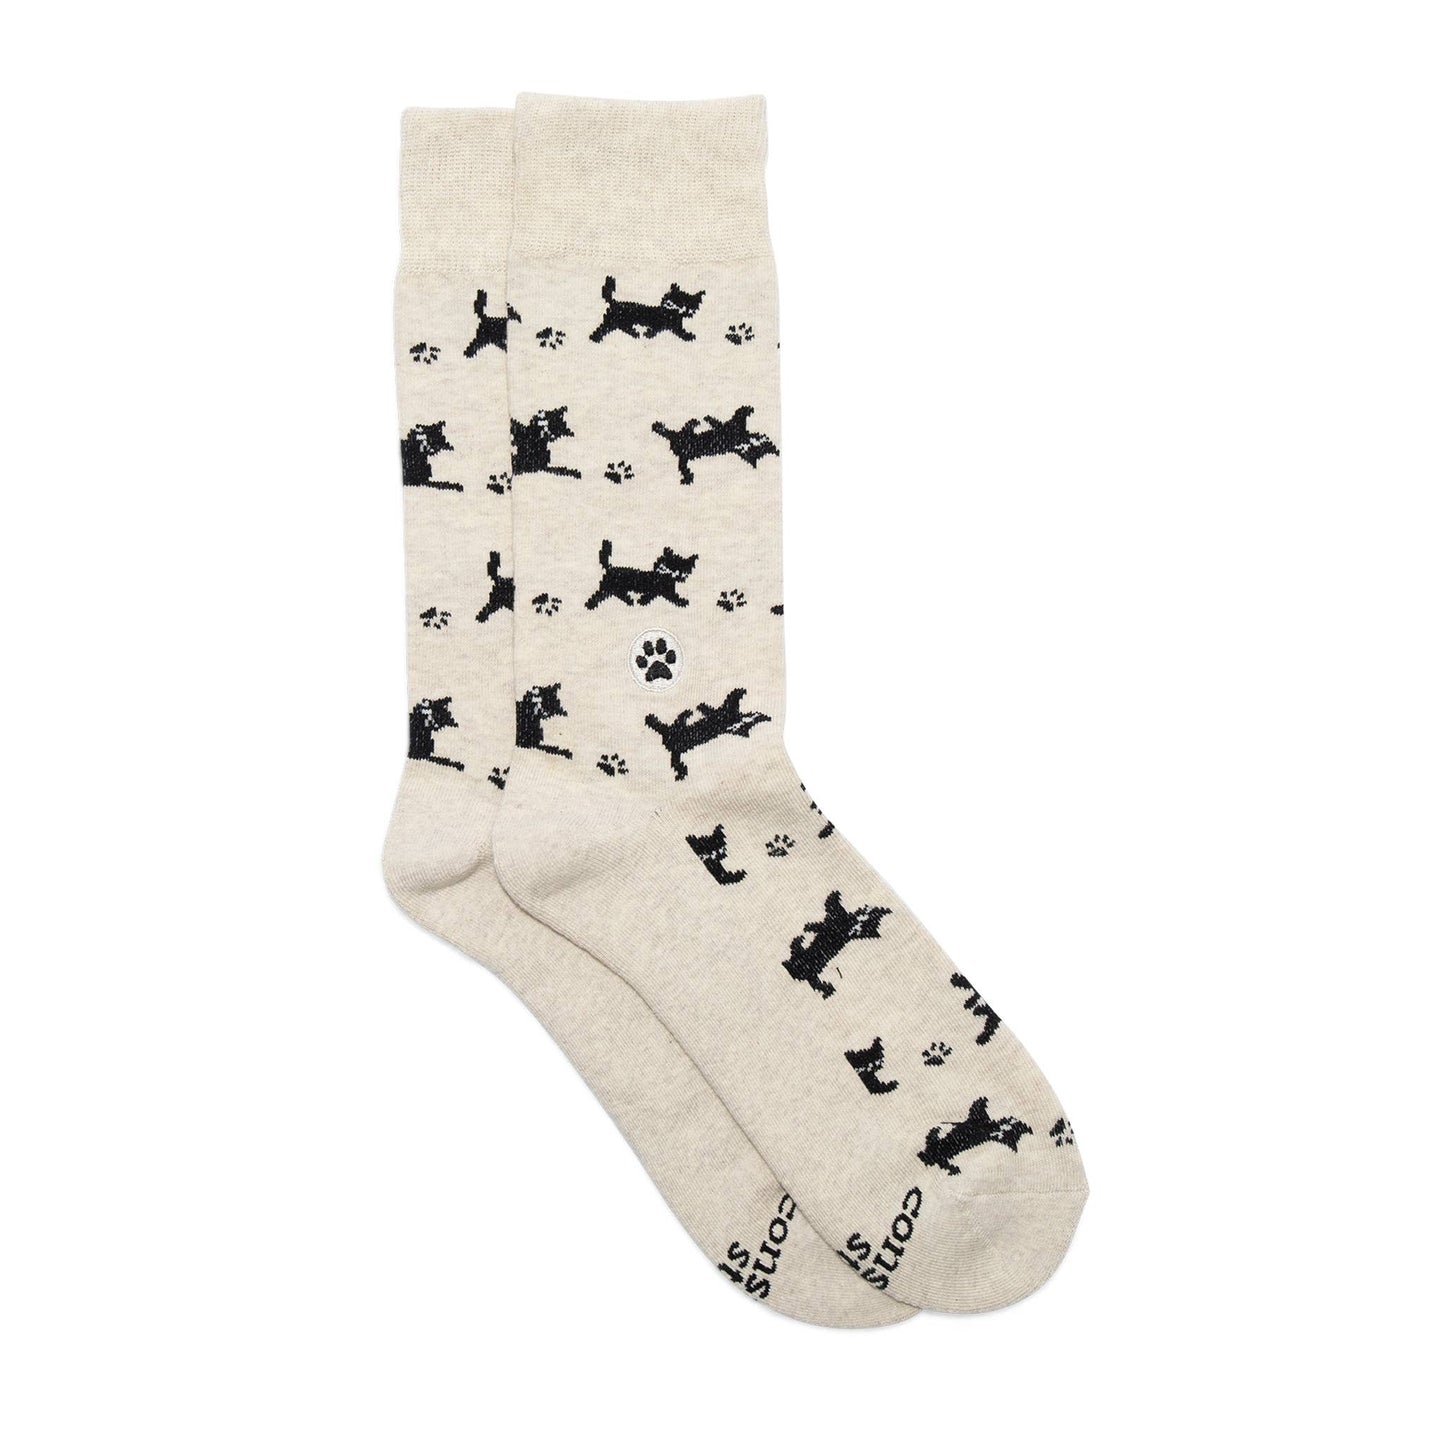 Socks that Save Cats (Beige Cats): Small